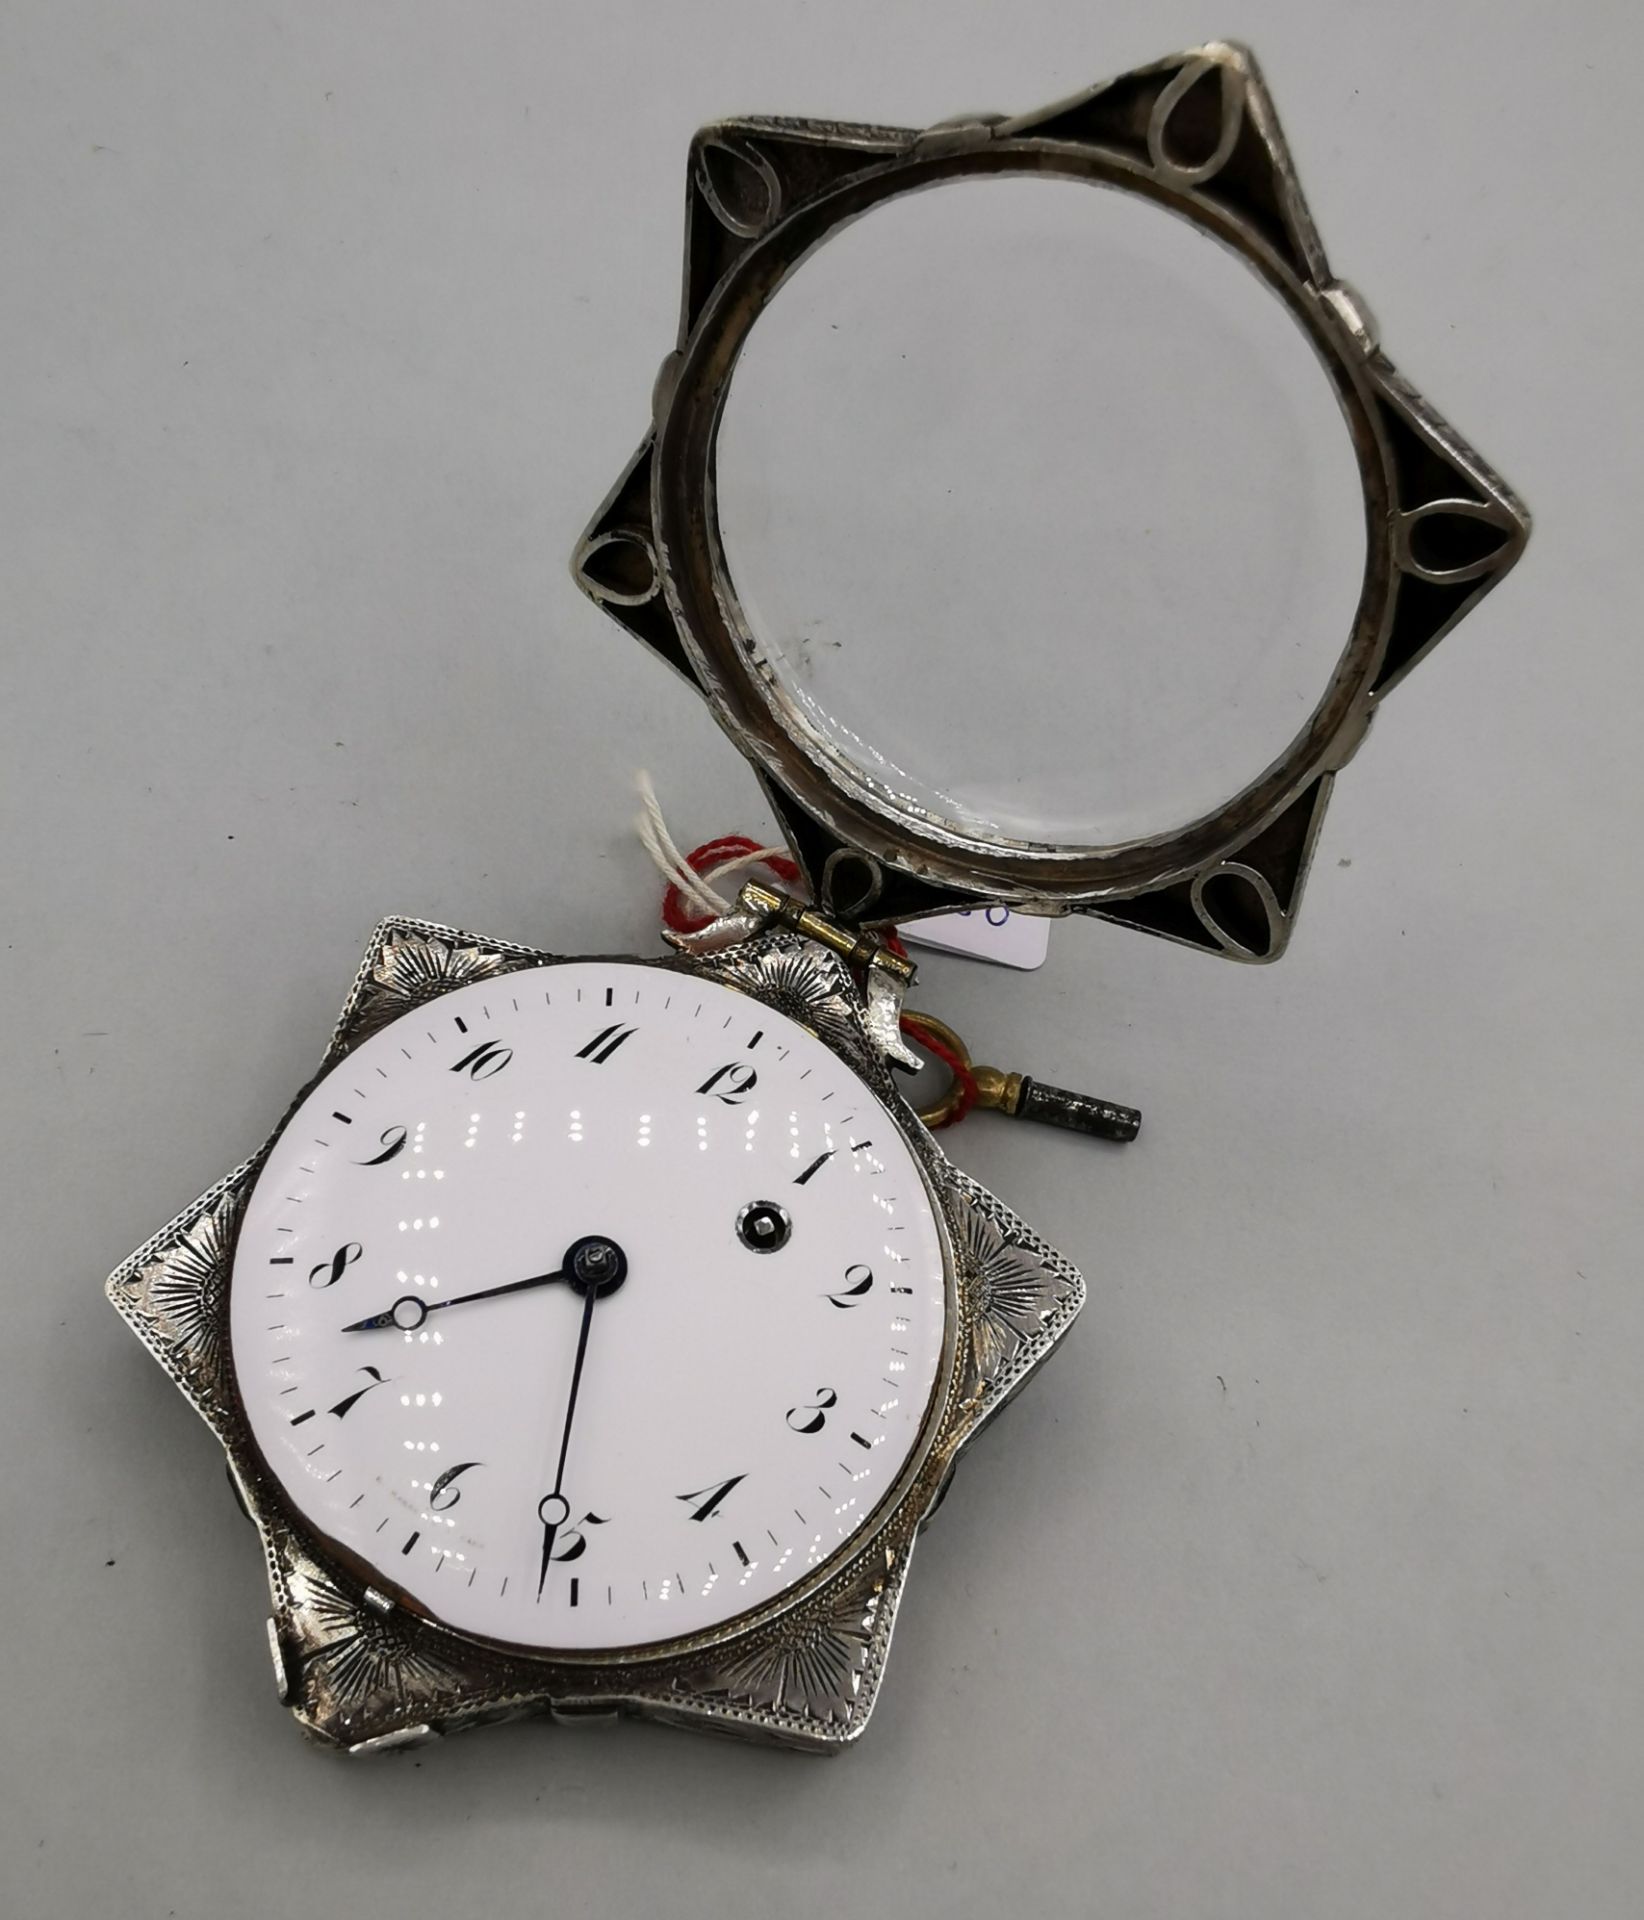 SPINDLE POCKET WATCH IN STAR-SHAPED CASE - Image 7 of 10